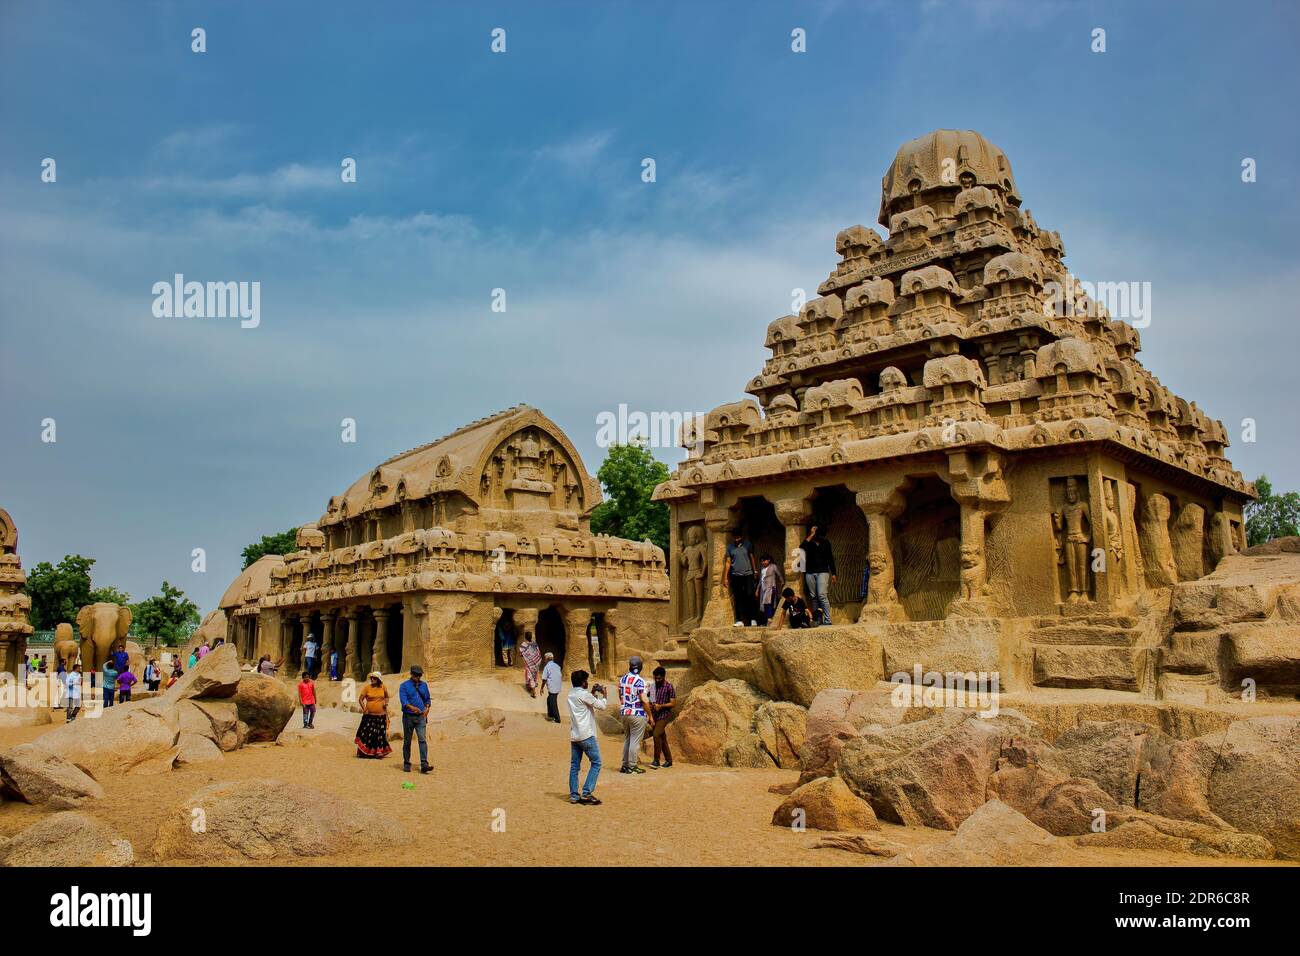 Chennai, South India - October 28, 2018: Wide angle shot of Mamallapuram or Mahabalipuram shore temple which is a stone carved temple built during Pal Stock Photo